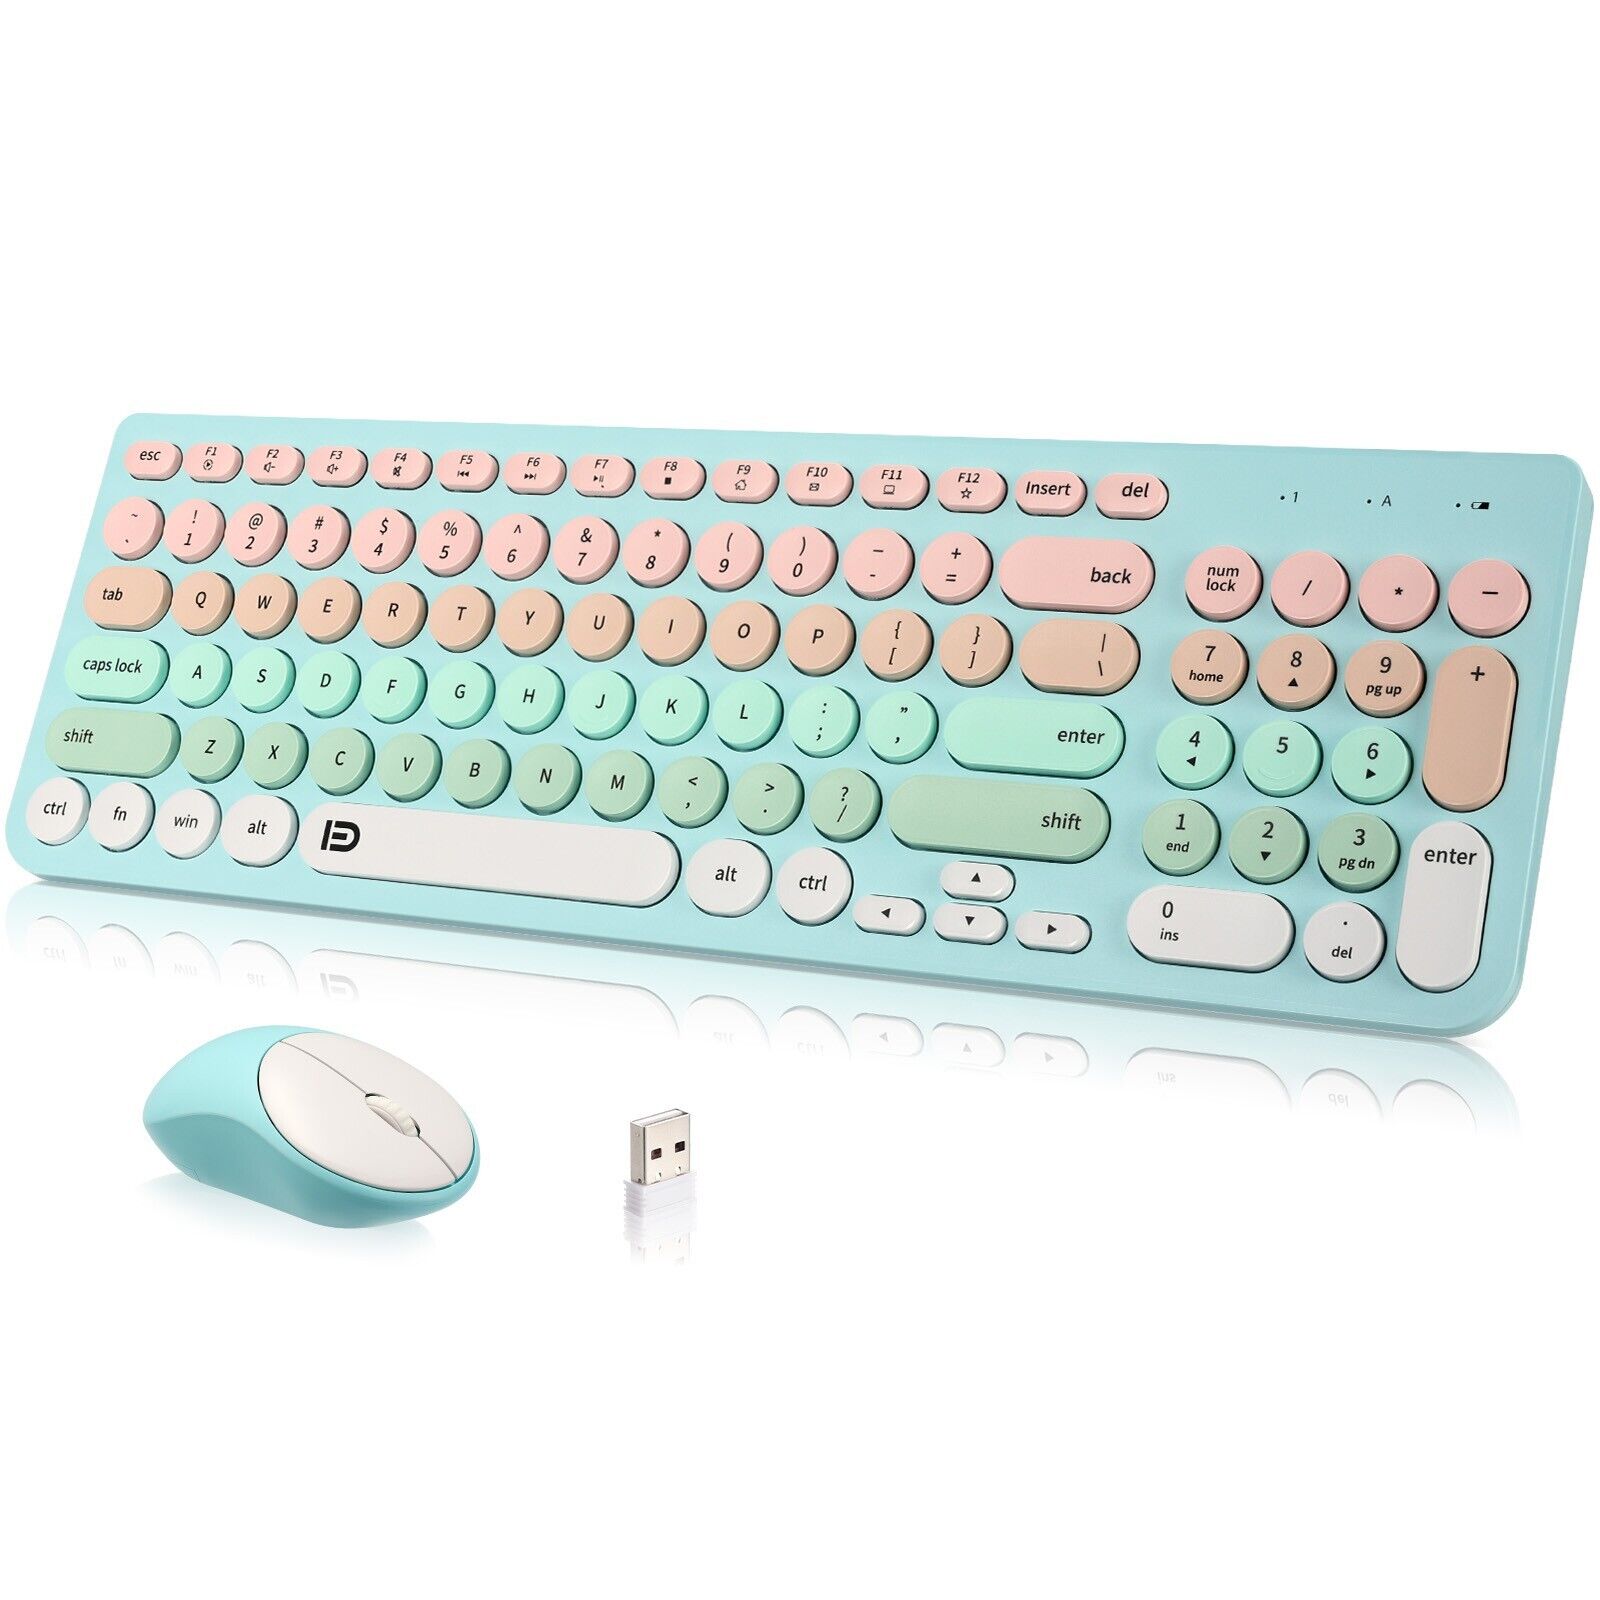 2.4G Wireless Retro Punk Round Keycap keyboard and Mouse Combo for PC,Laptop